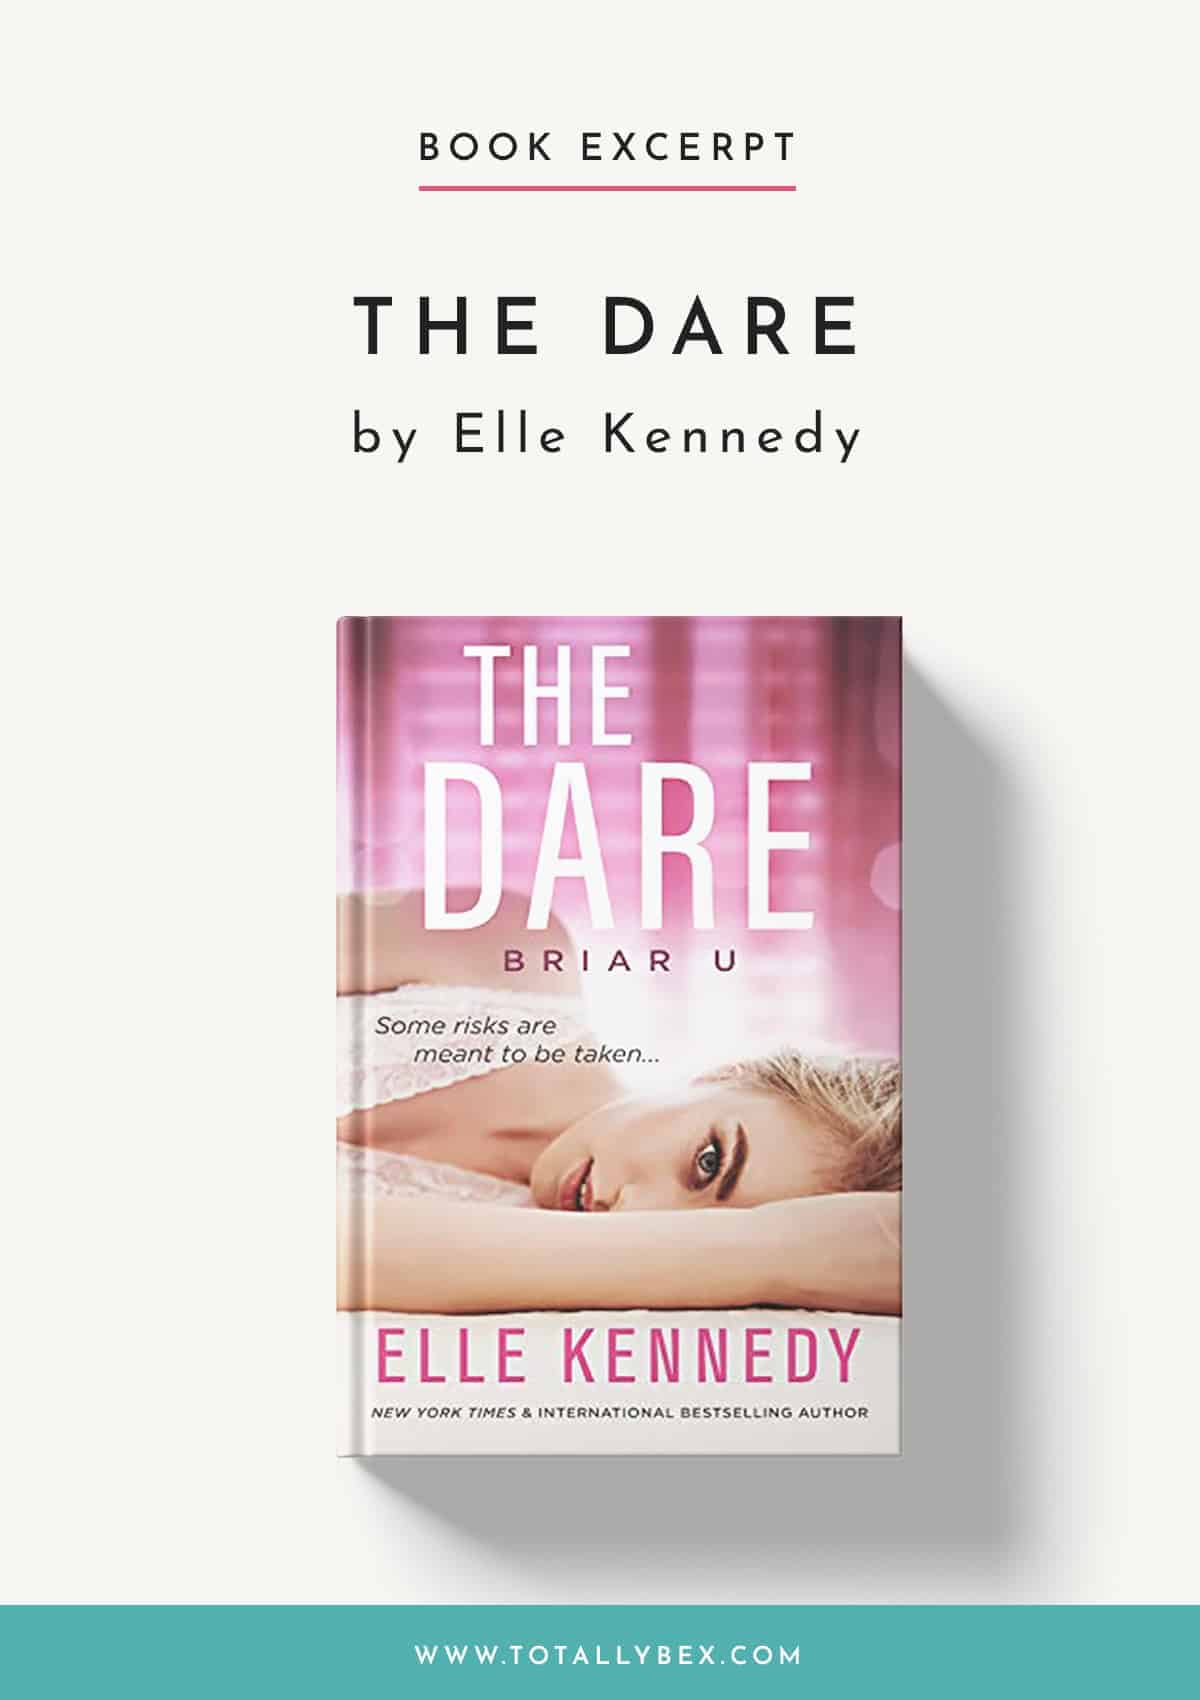 The Dare by Elle Kennedy-Book Excerpt-Social